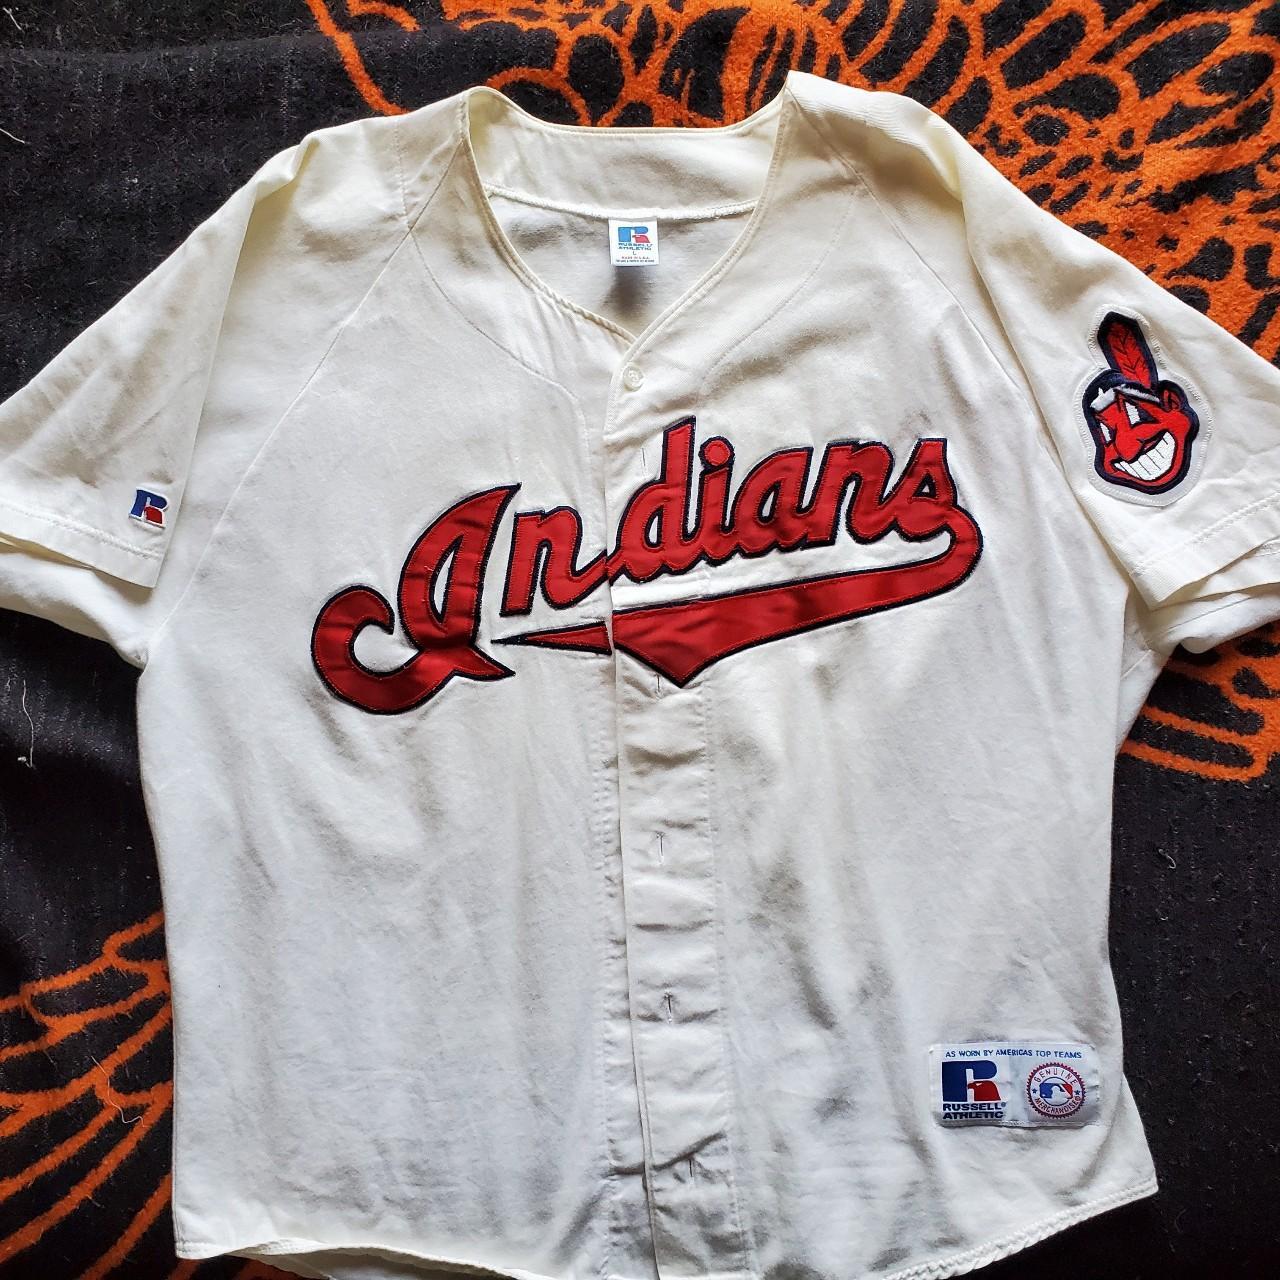 Vintage 90s Russell Athletic Cleveland Indians Baseball Jersey